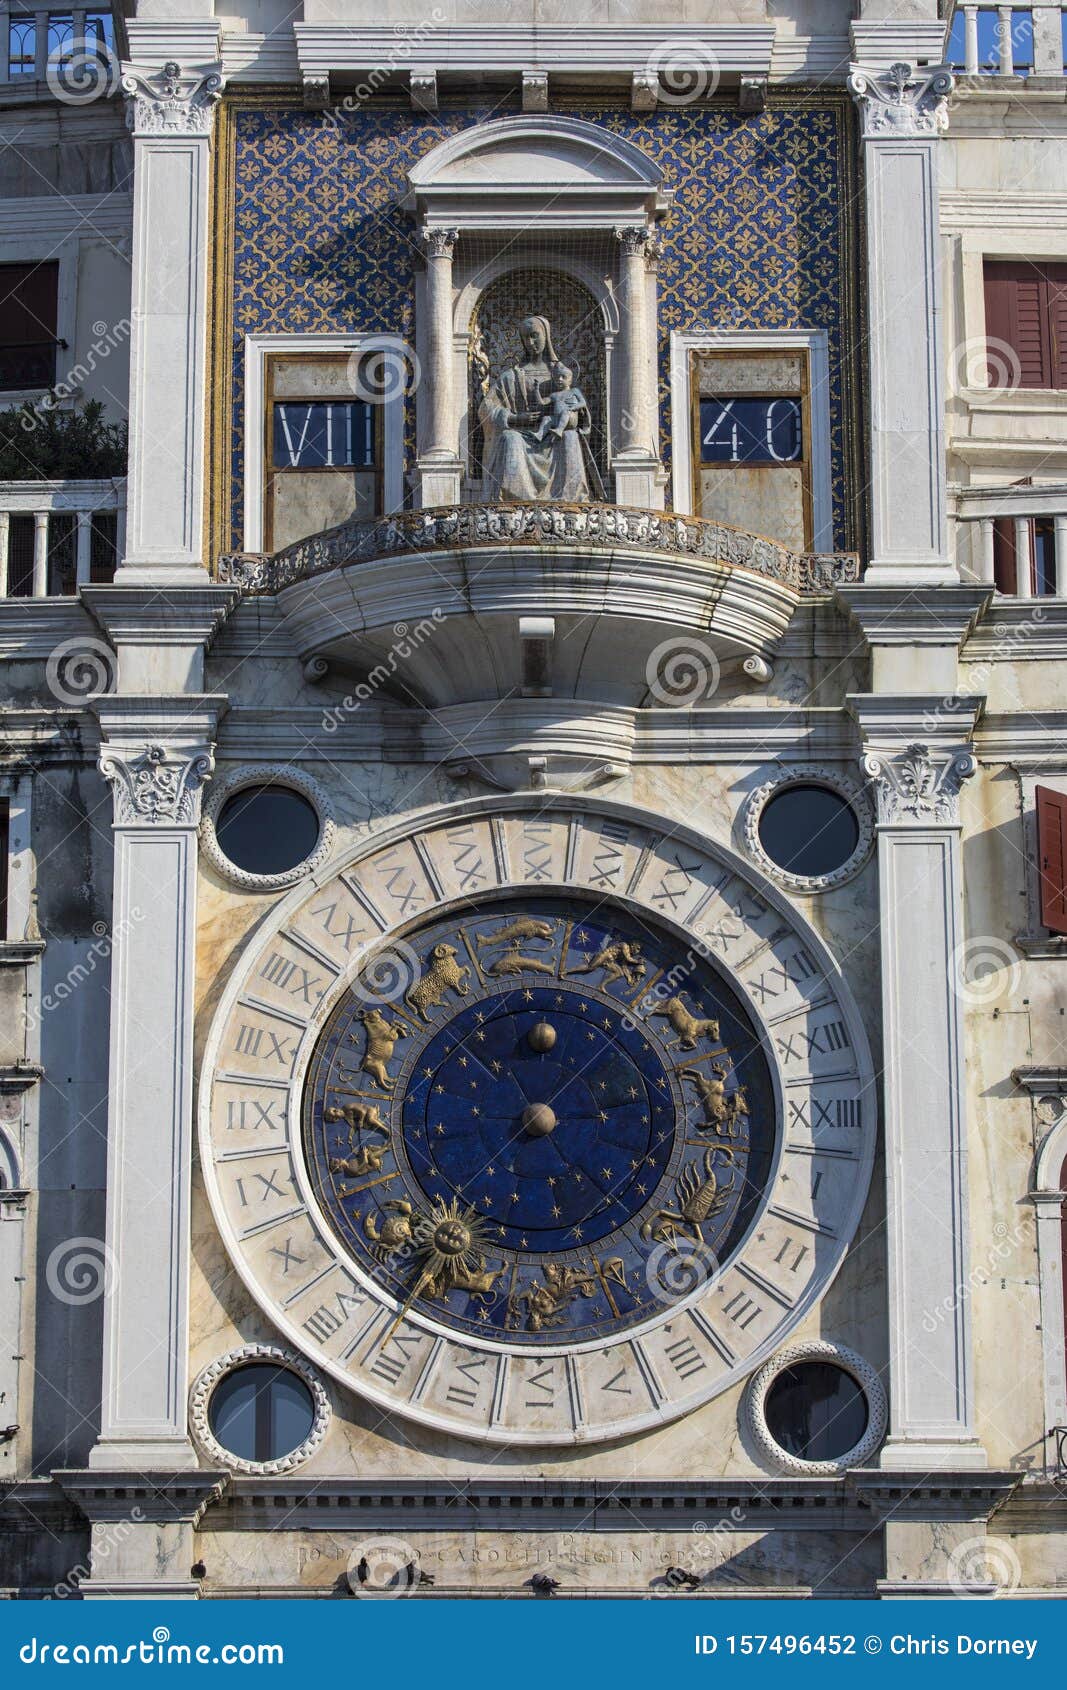 st. marks clock tower in venice